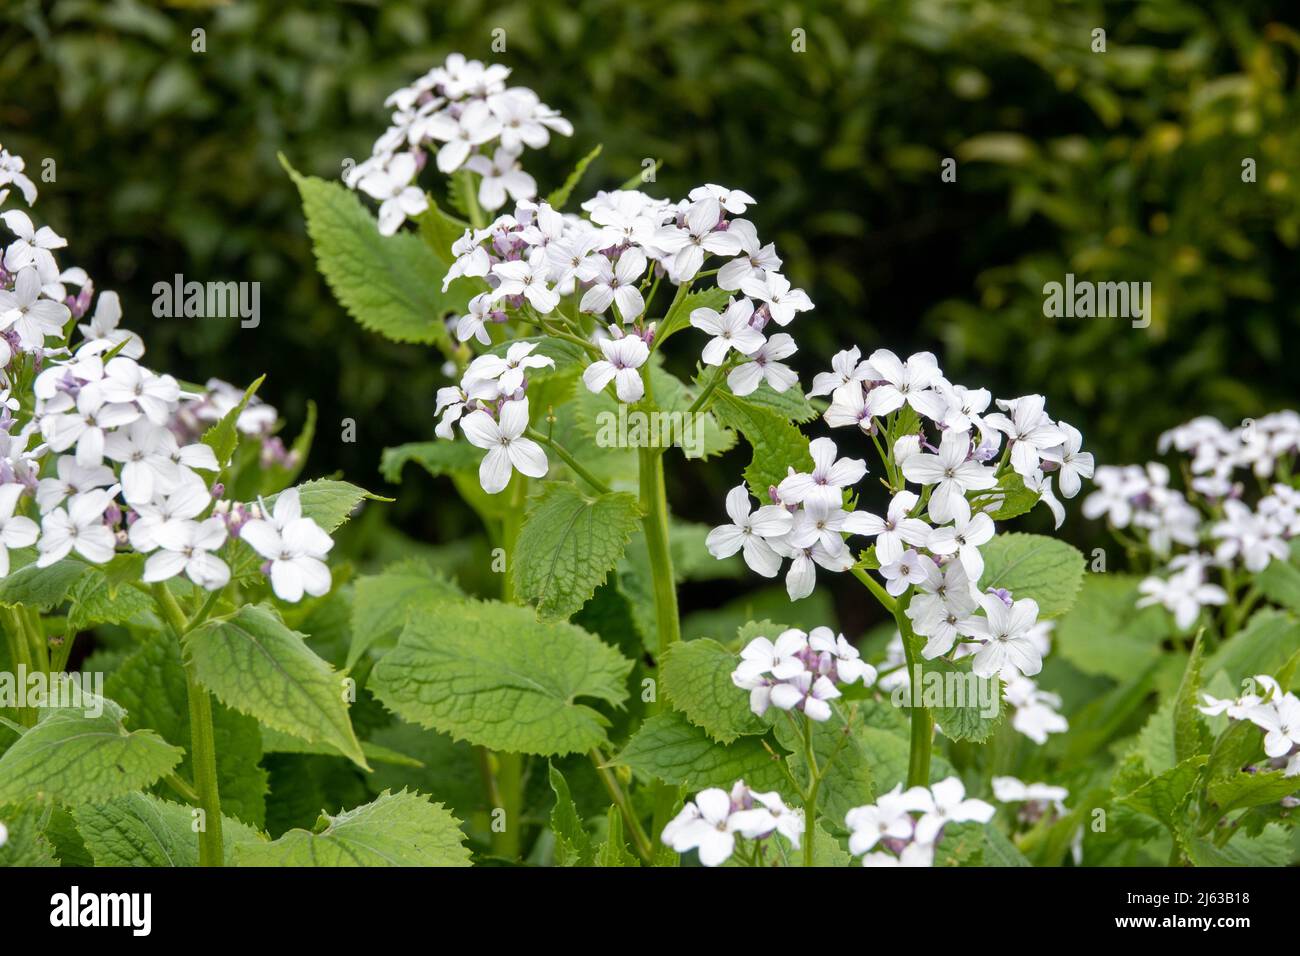 clusters of white flowers of perennial honesty lunaris rediviva Stock Photo